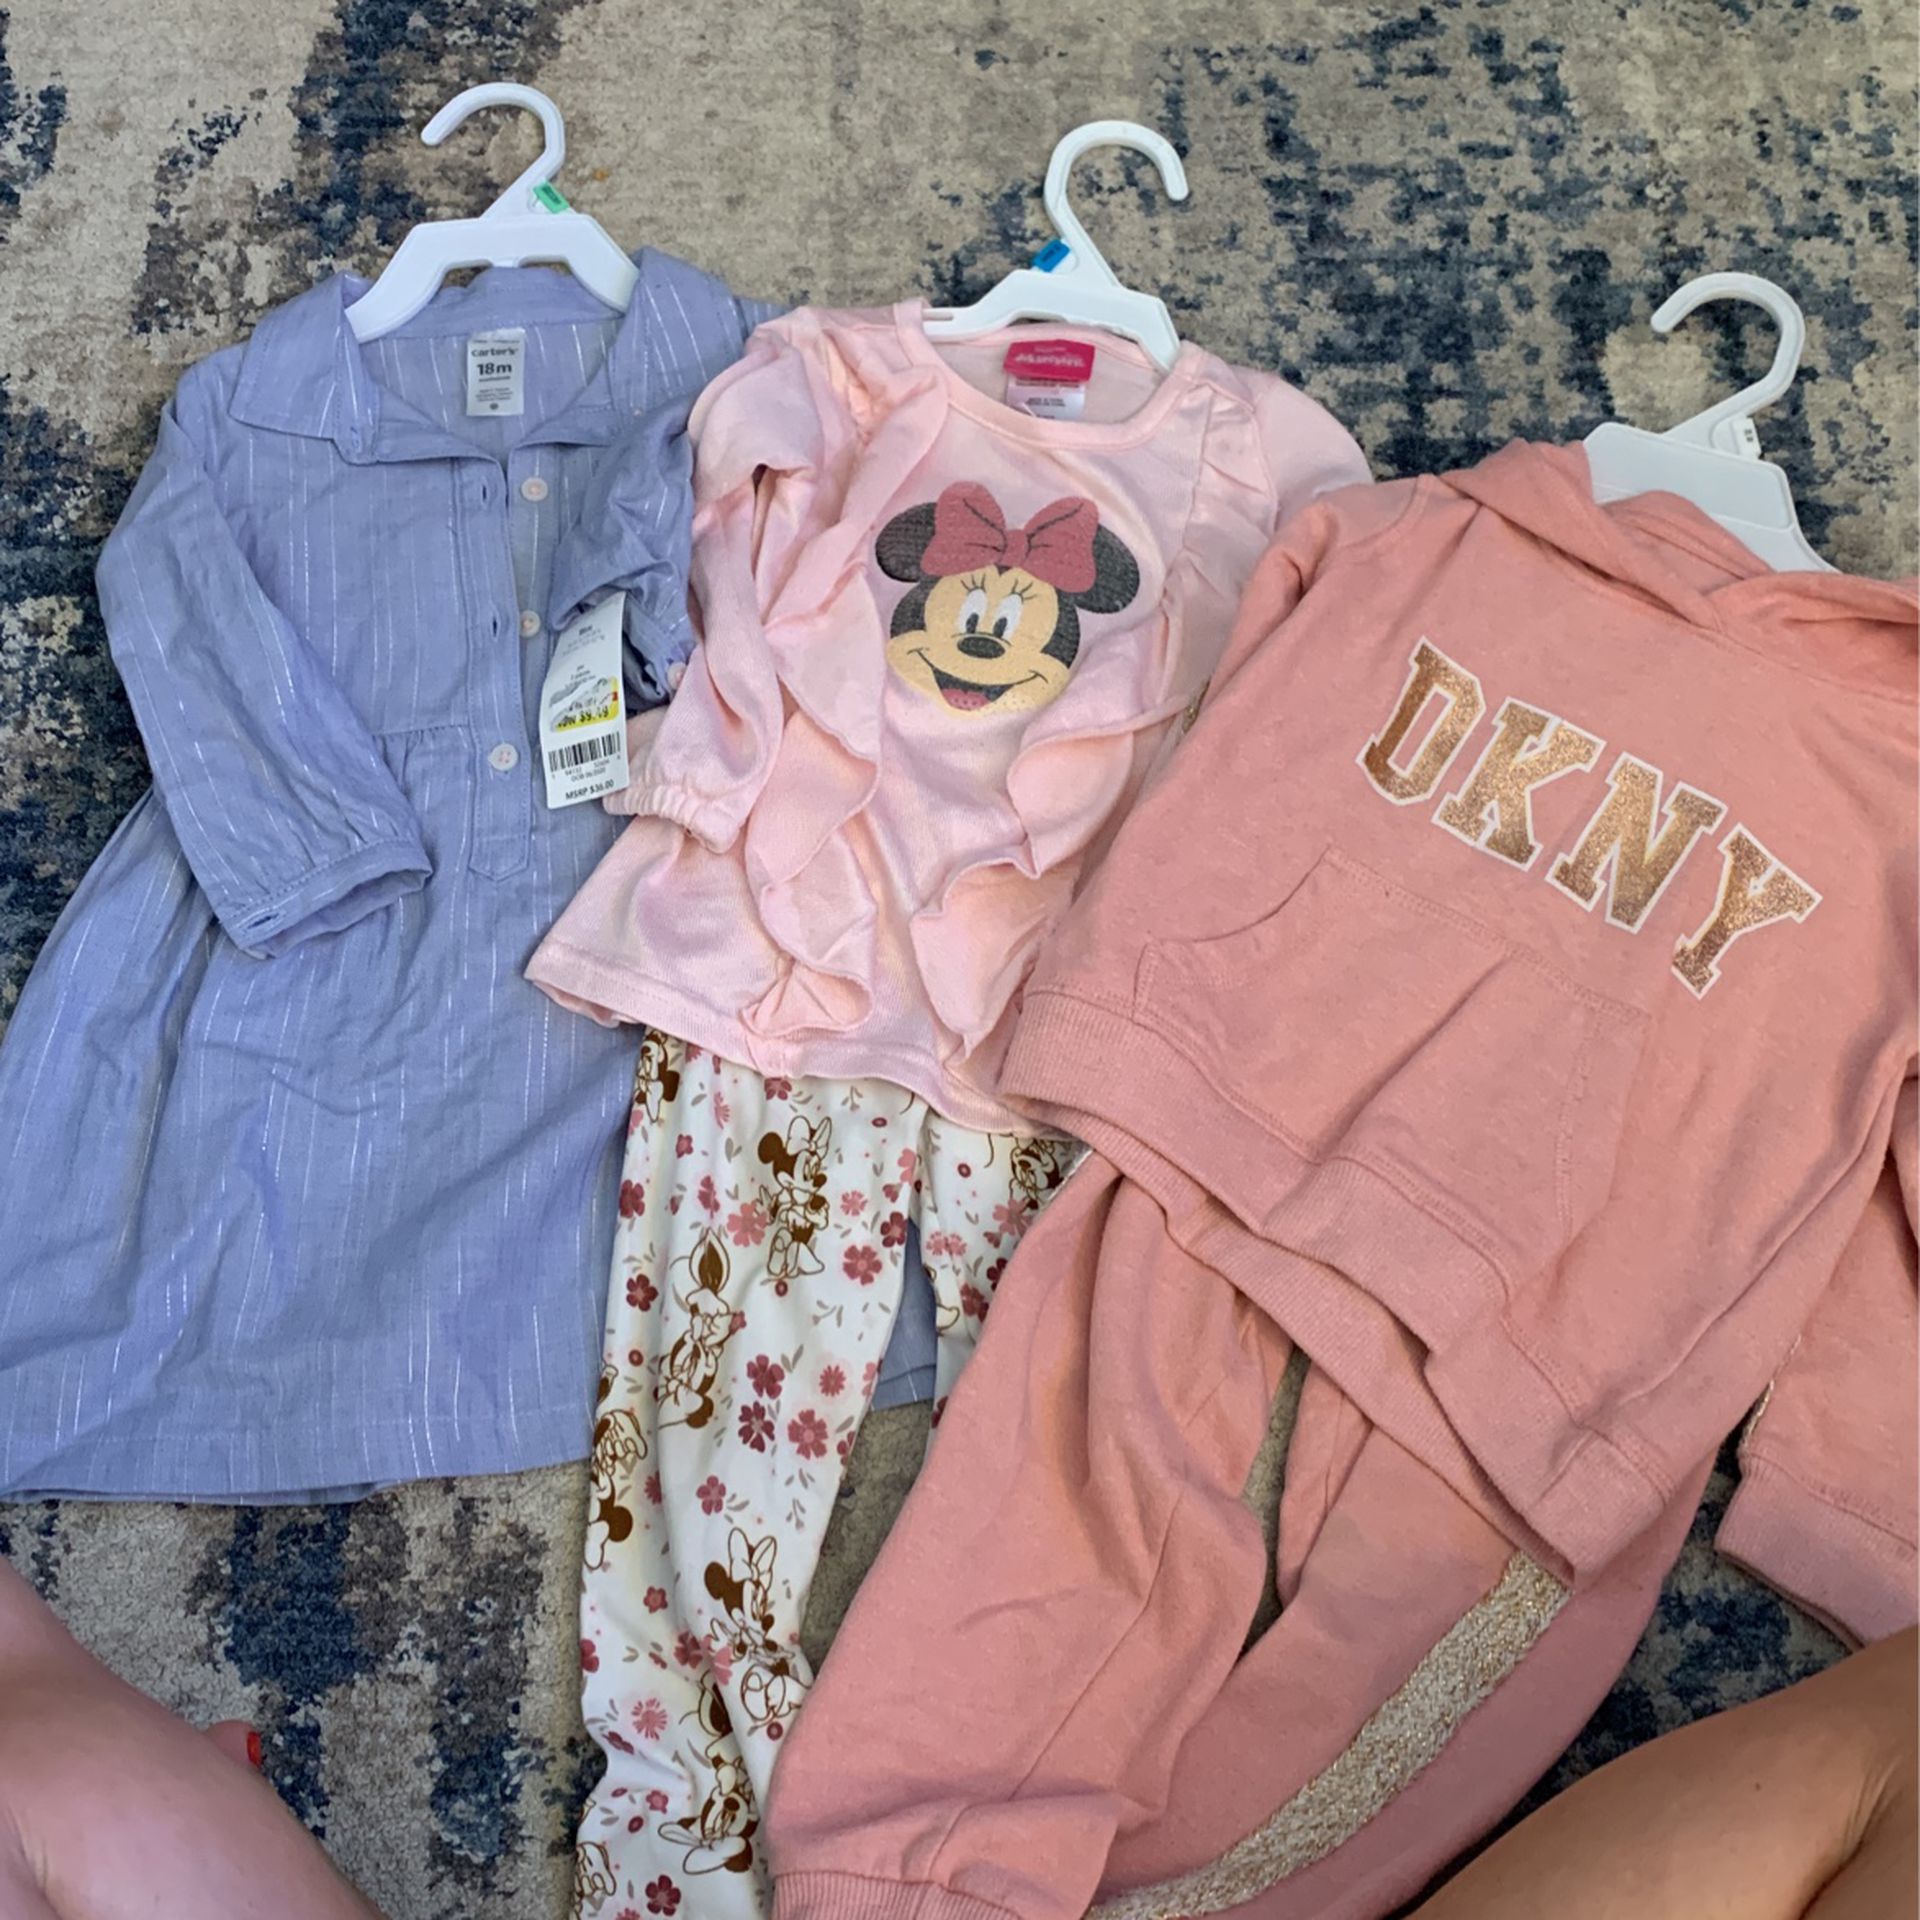 3 Toddler Girls Outfits